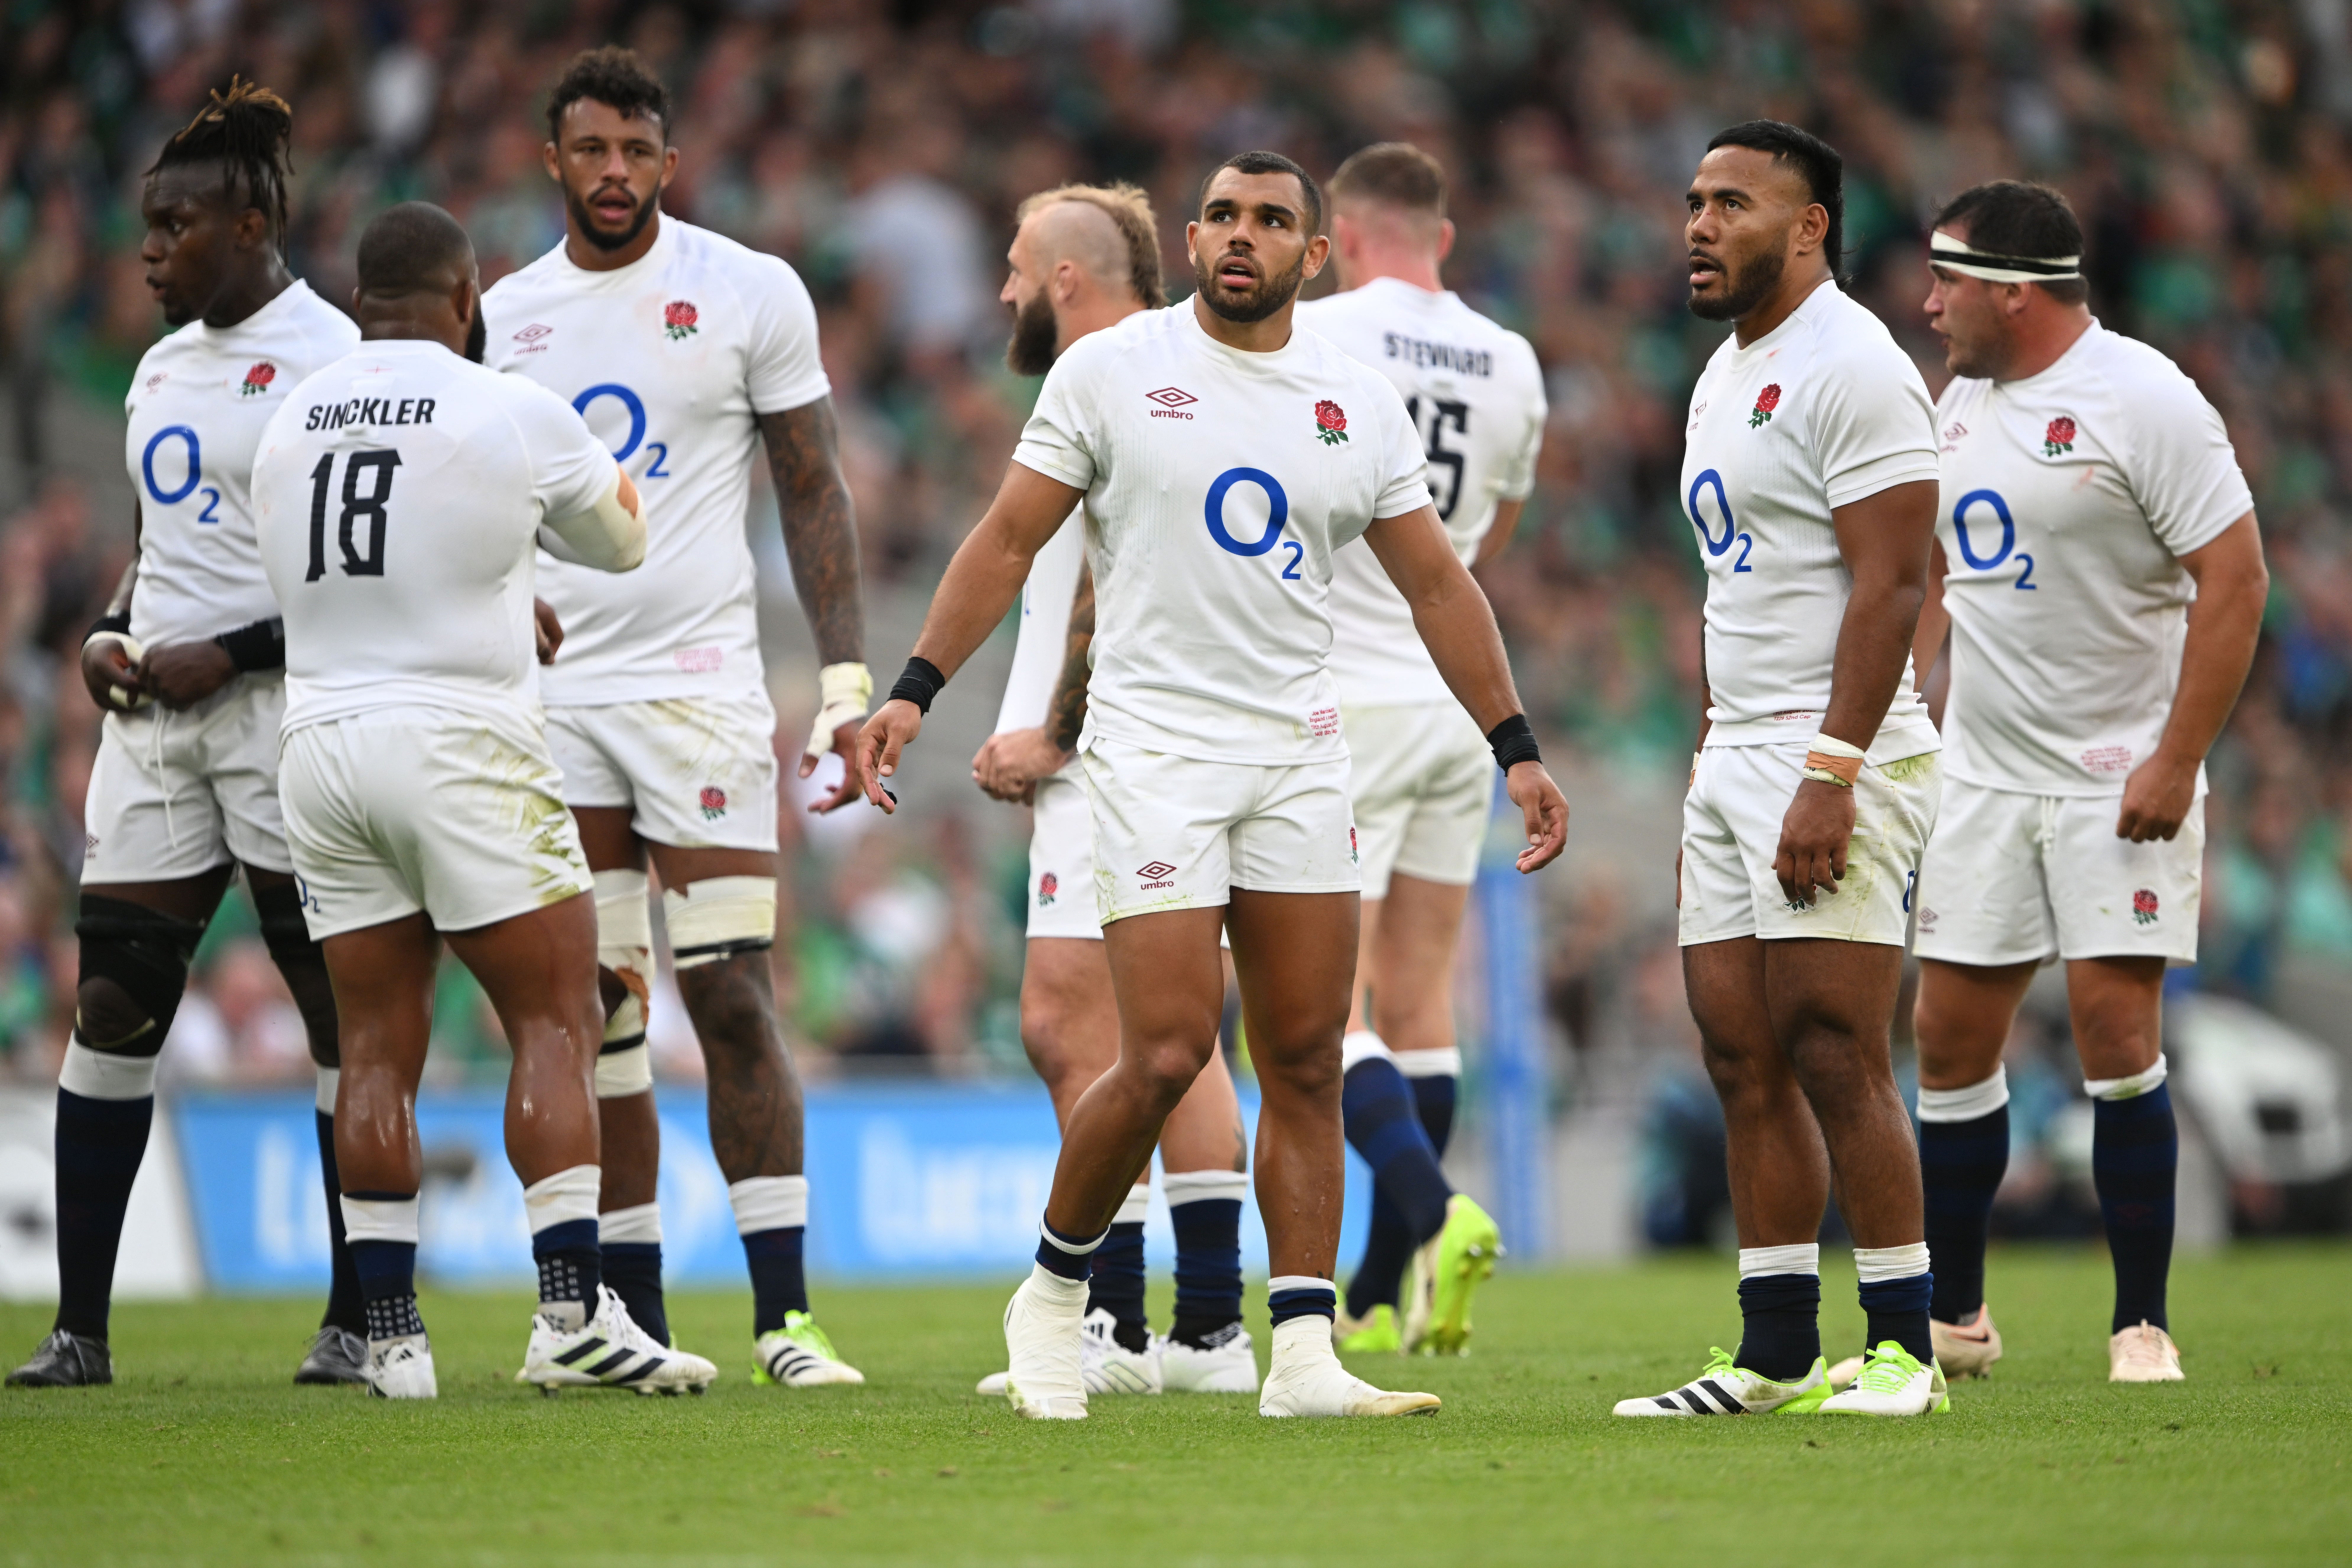 England’s Rugby World Cup warm-up campaign has been a disaster